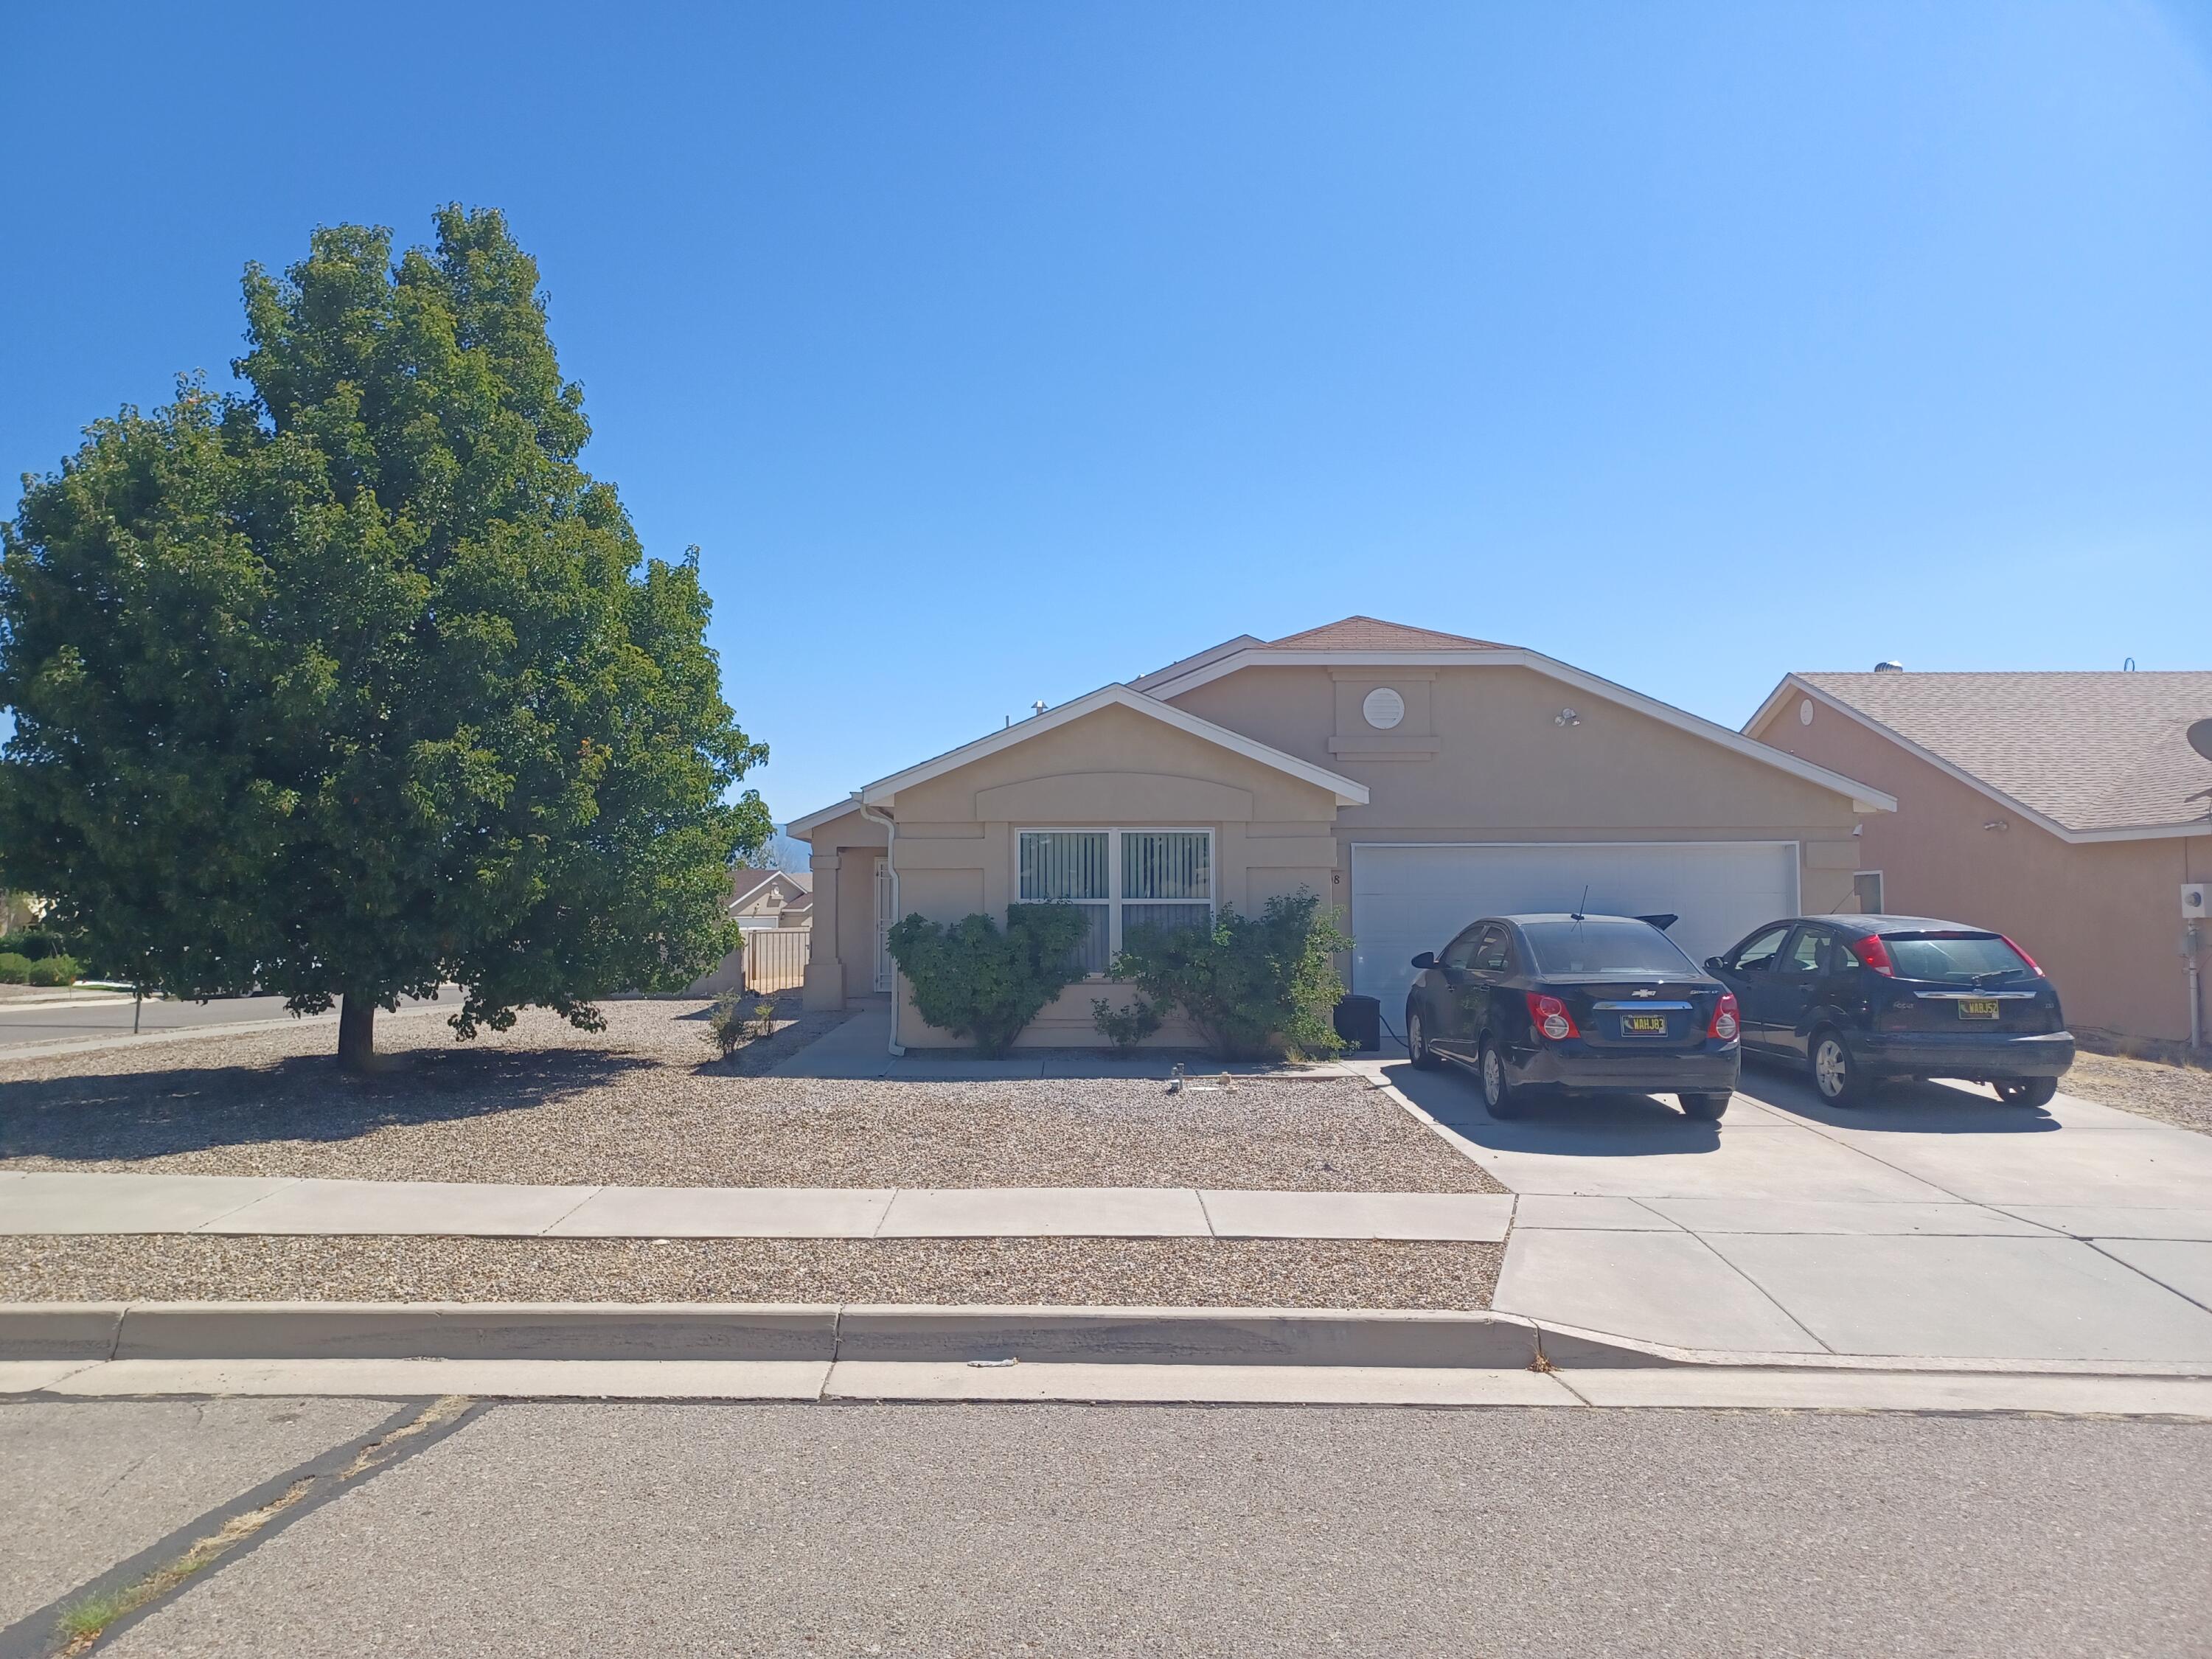 This Corner Lot home has a great floorplan. Offering 3 bedrooms and 2 full baths. High ceilings and large living room make this home feel comfy and inviting.  Located in the lovely Ventana ranch area. Close access to many amenities and Paseo Del Norte.  Come take a look before its gone.